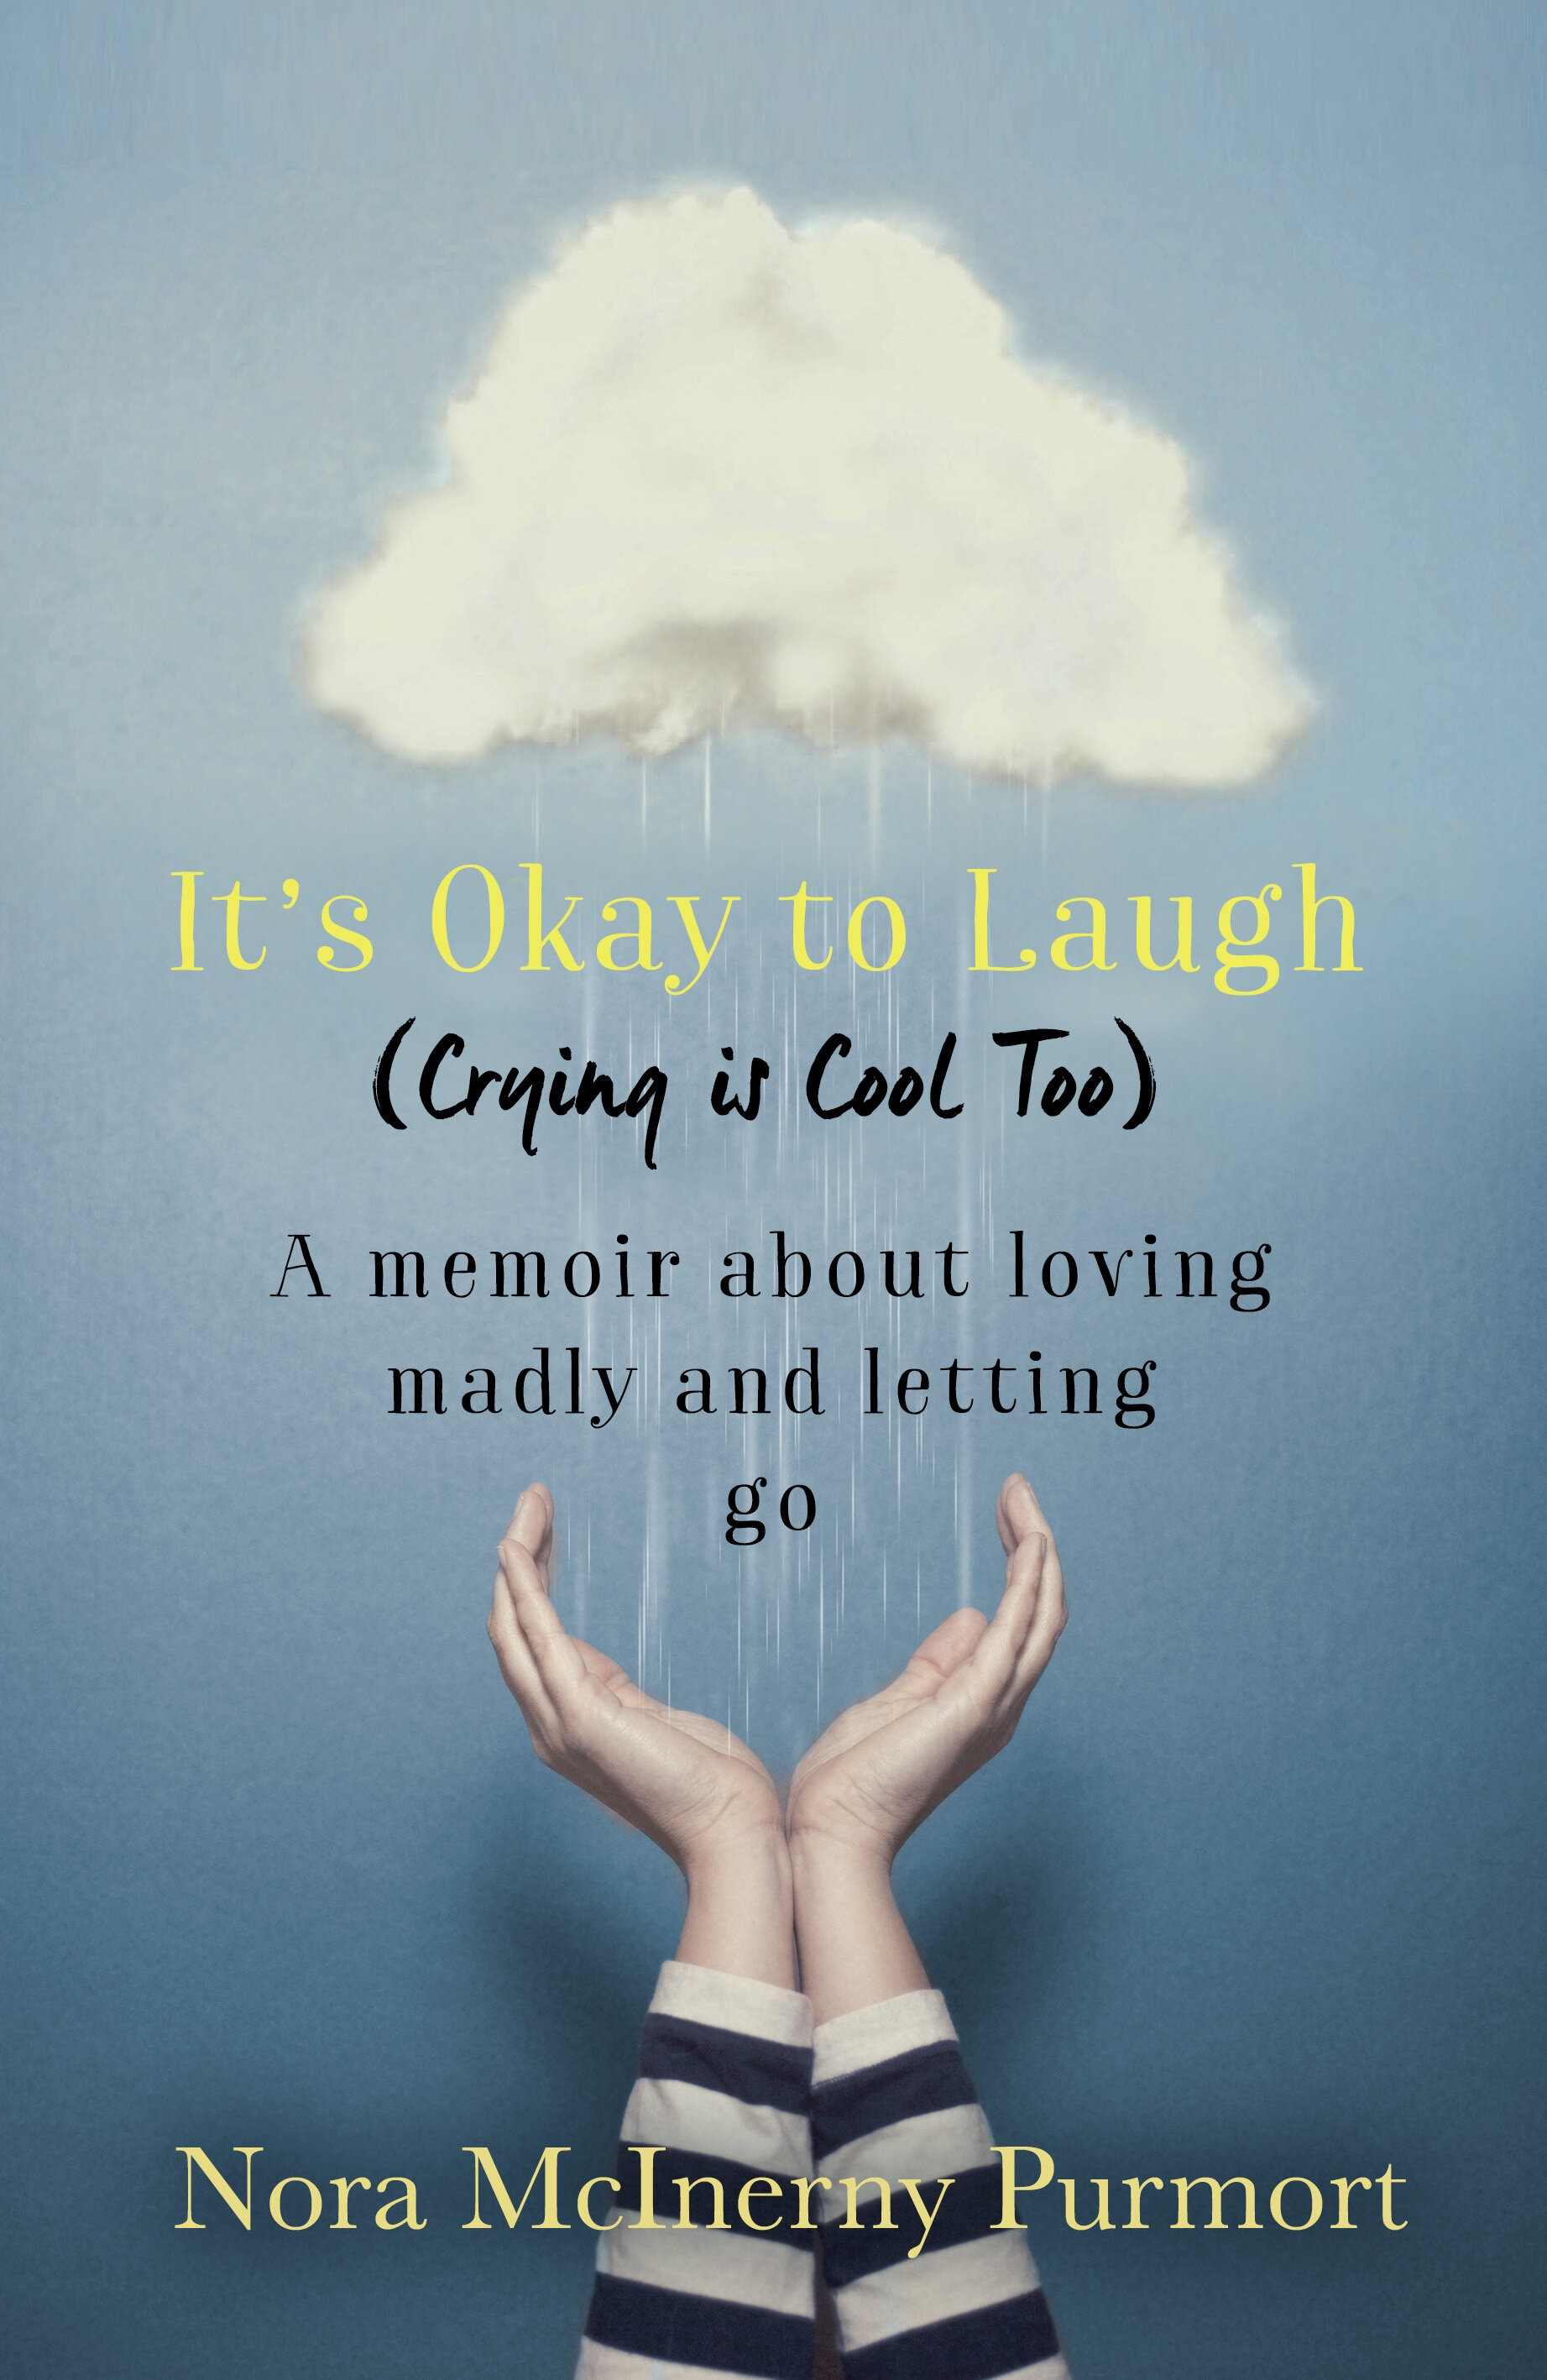 It's Okay to Laugh by Nora McInery.jpg